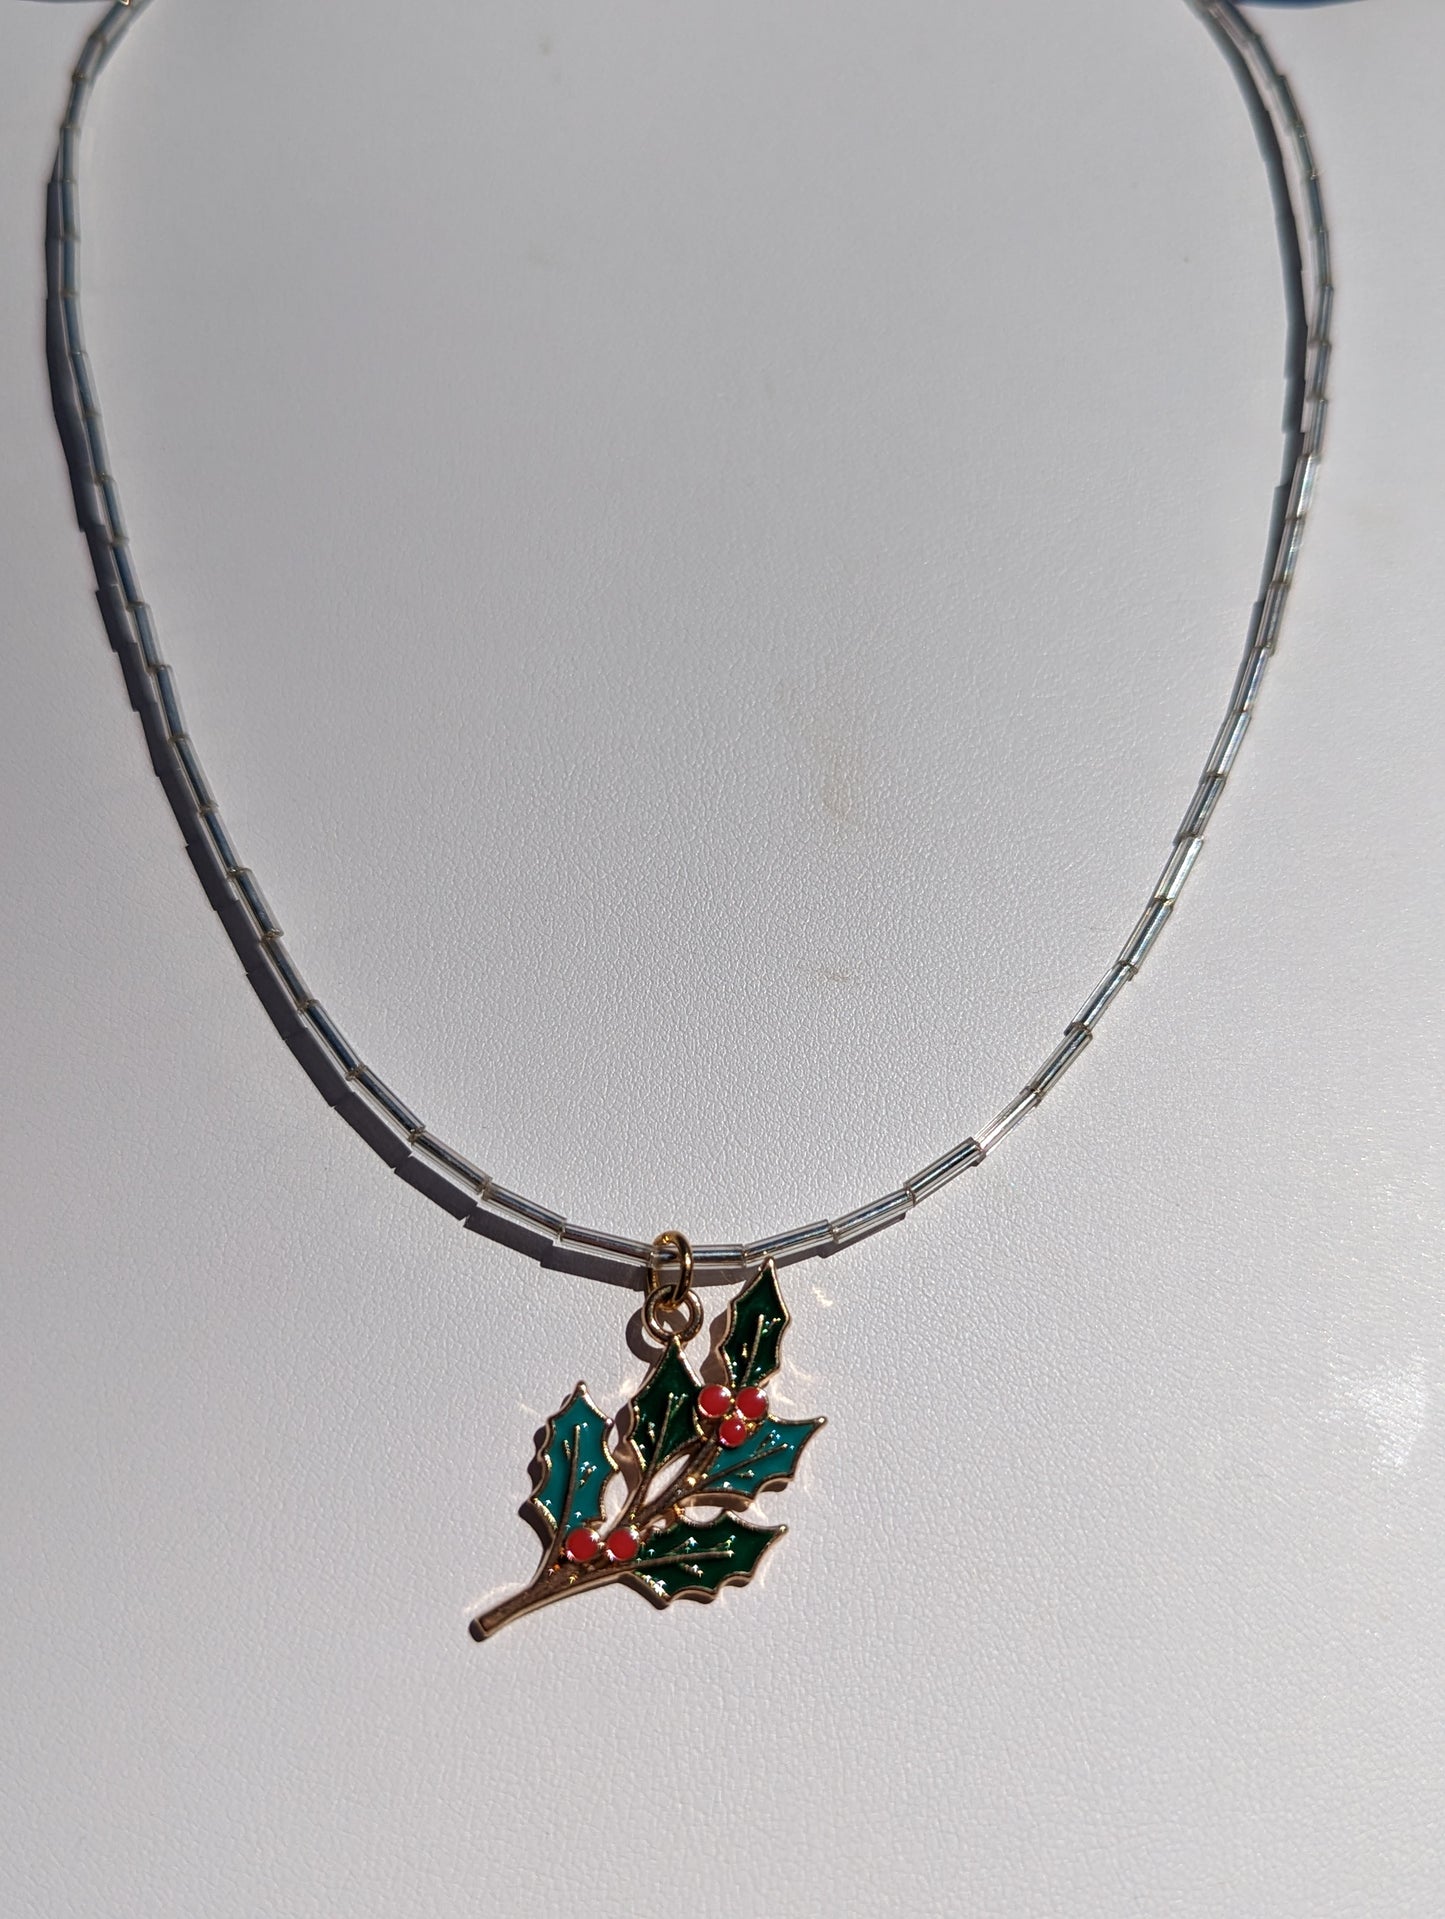 Crystalline Bugle Beads Necklace with Enamel Holly Sprig Charm